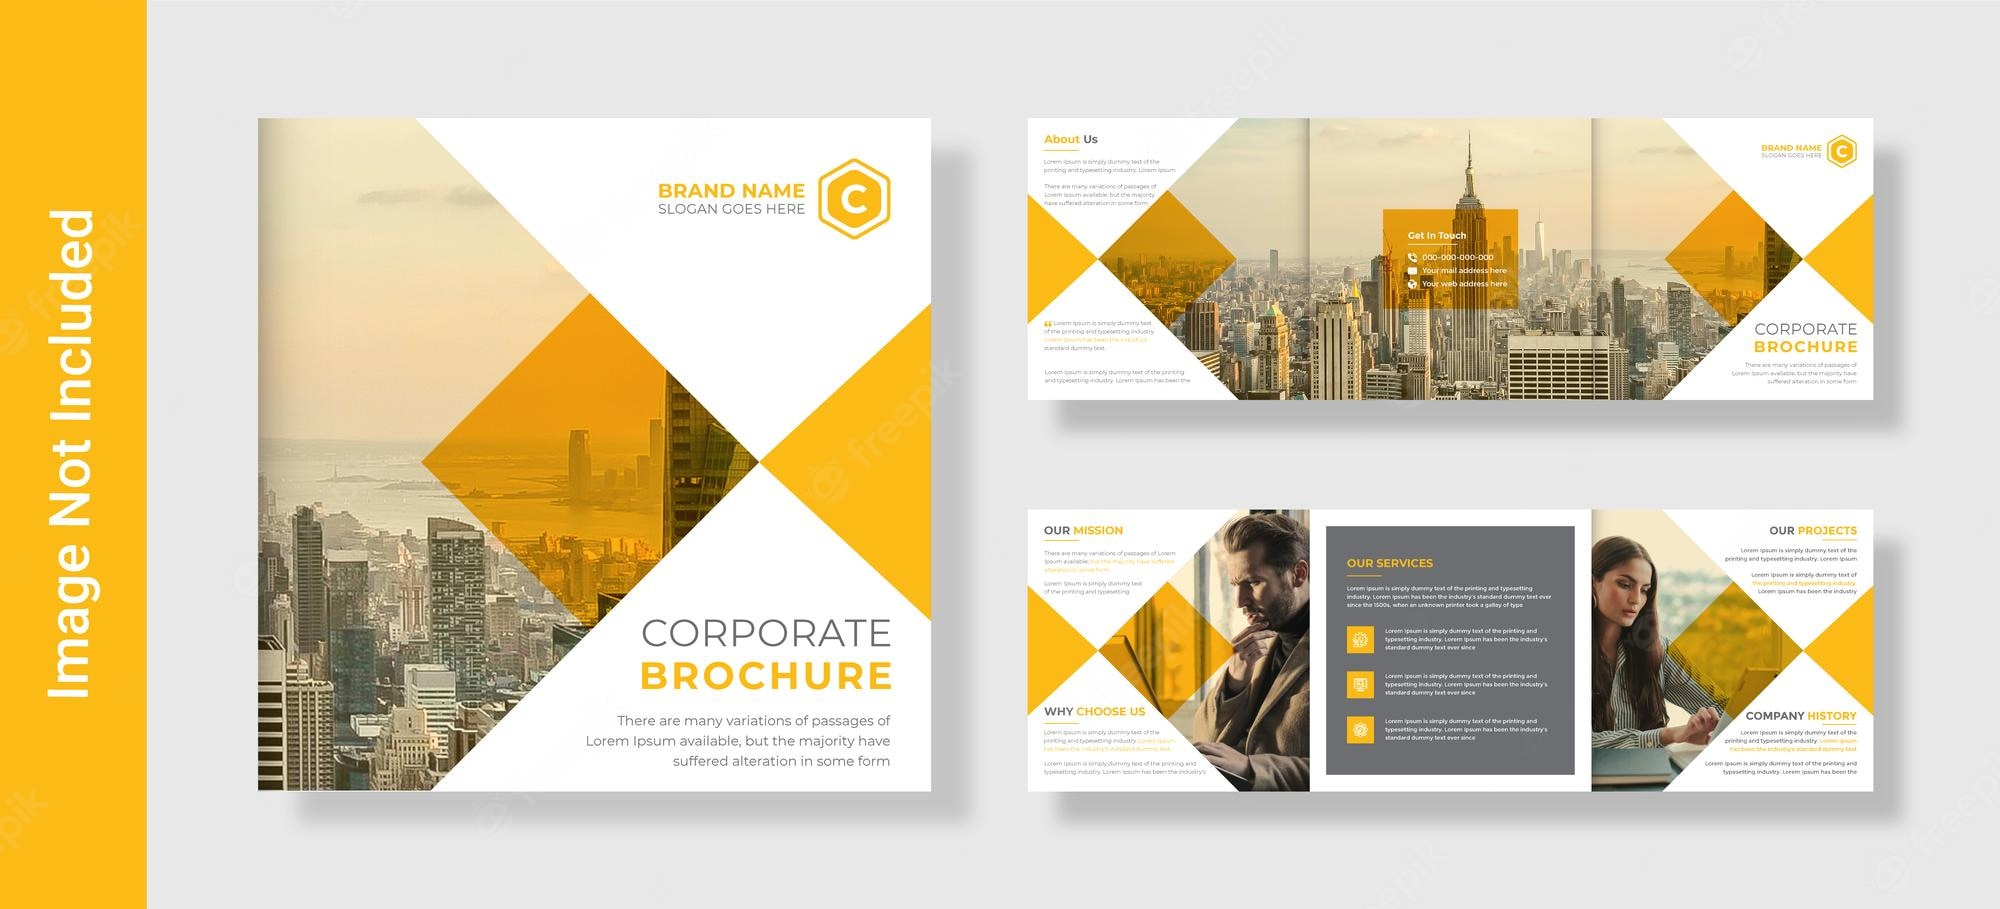 10 fold Images  Free Vectors, Stock Photos & PSD In 6 Sided Brochure Template